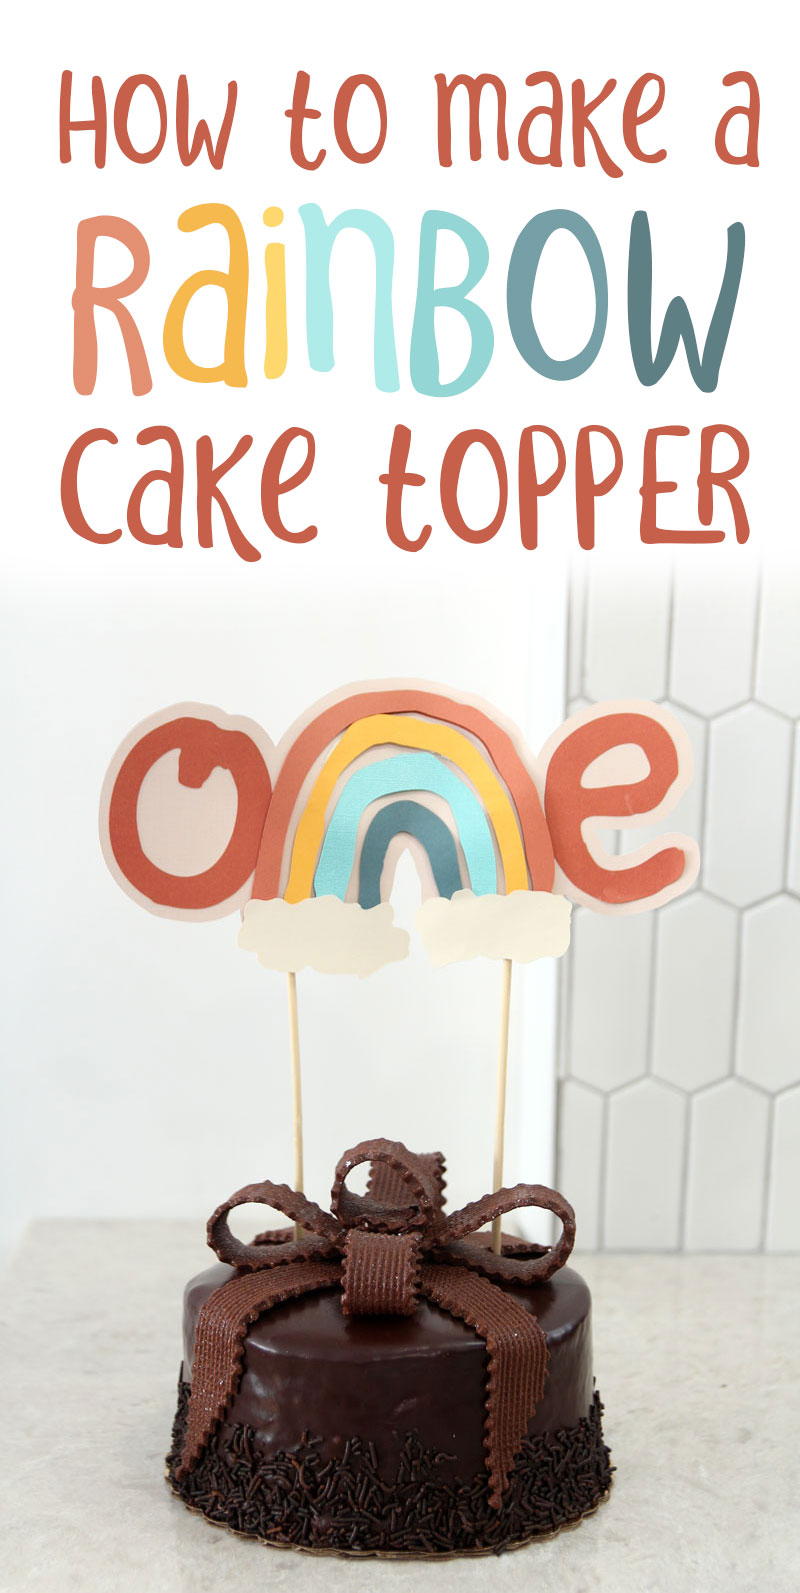 rainbow one cake topper title image with text